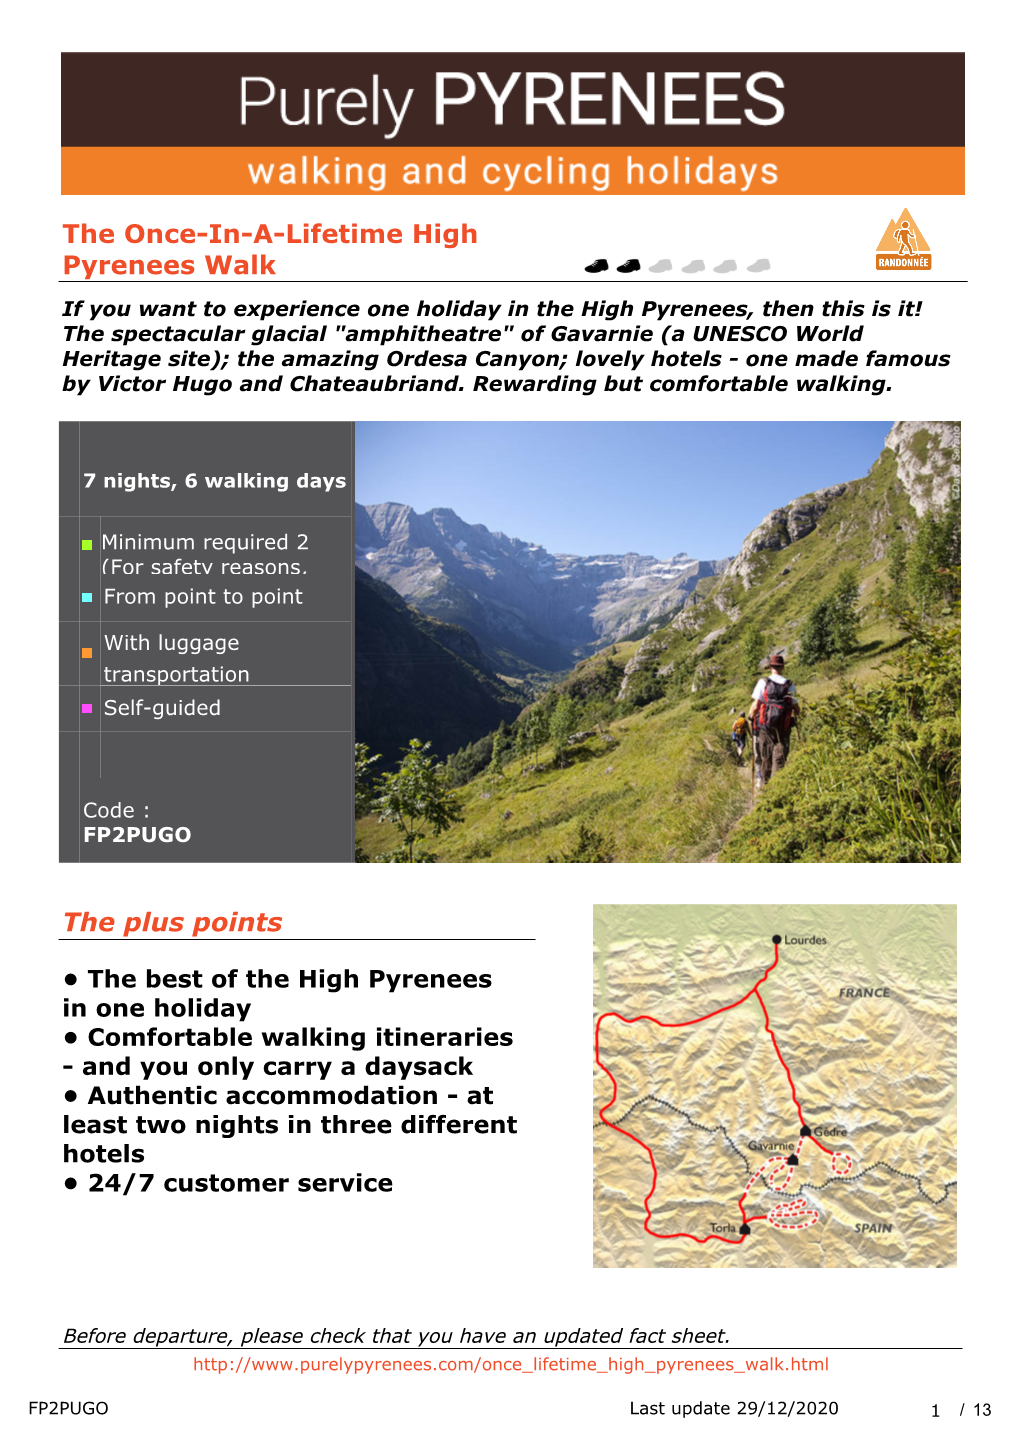 The Once-In-A-Lifetime High Pyrenees Walk the Plus Points